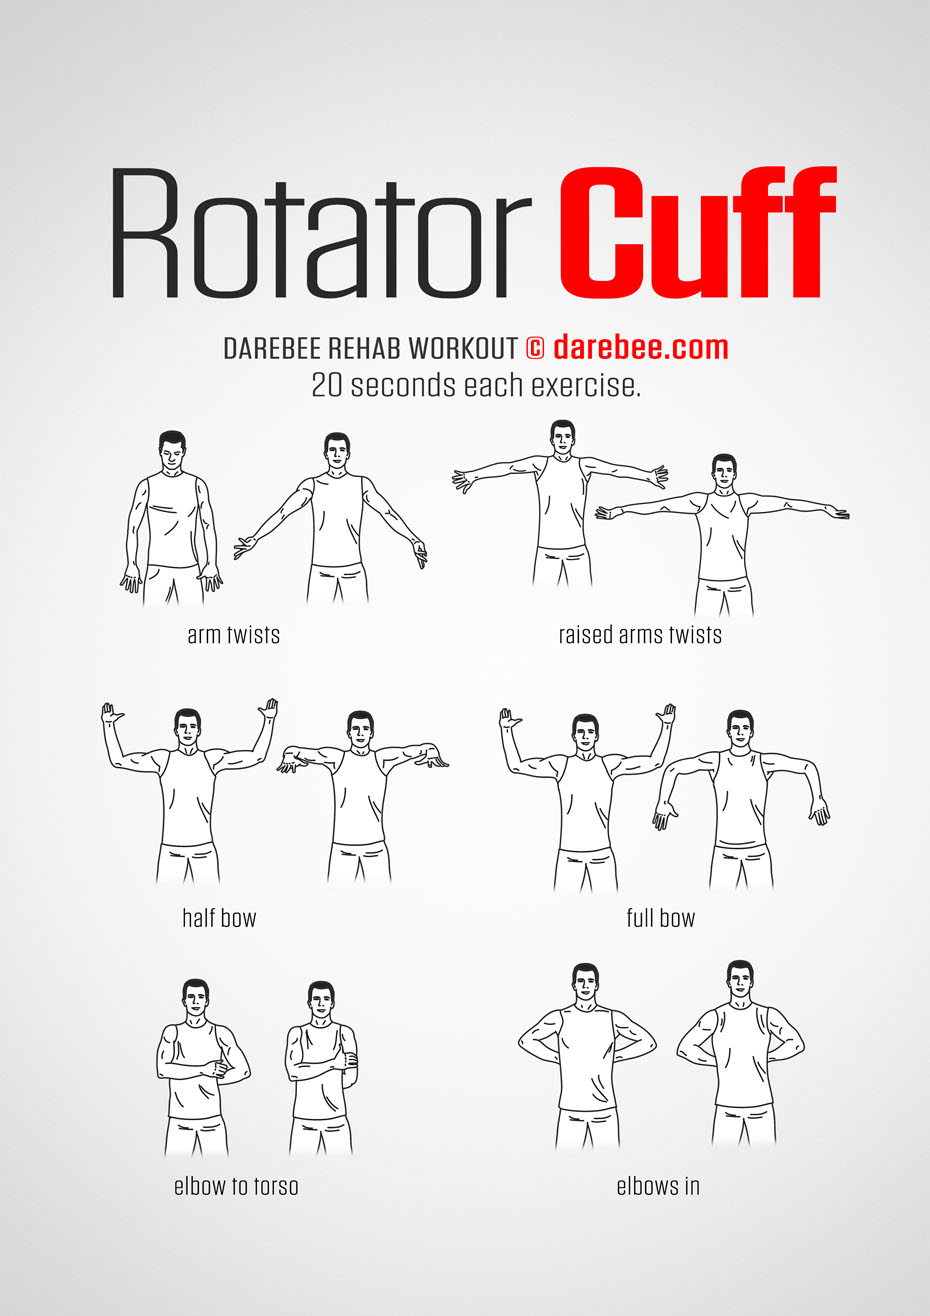 How To Do Rotator Cuff Exercises Online Degrees